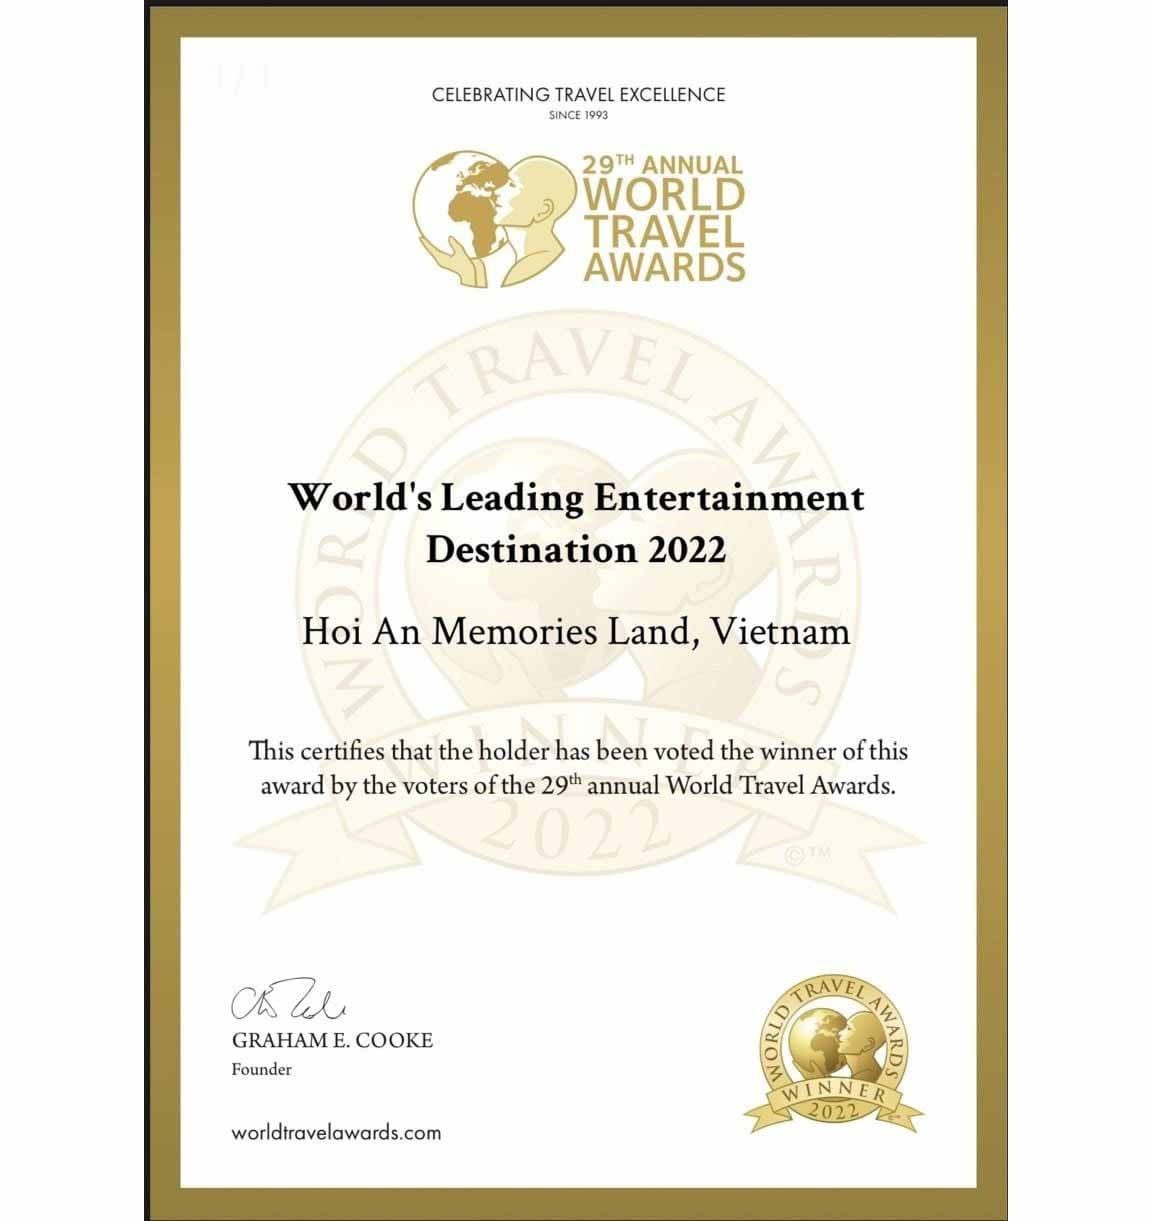 The certificate for Hoi An Memories Land - the World Leading Entertainment Destination 2022